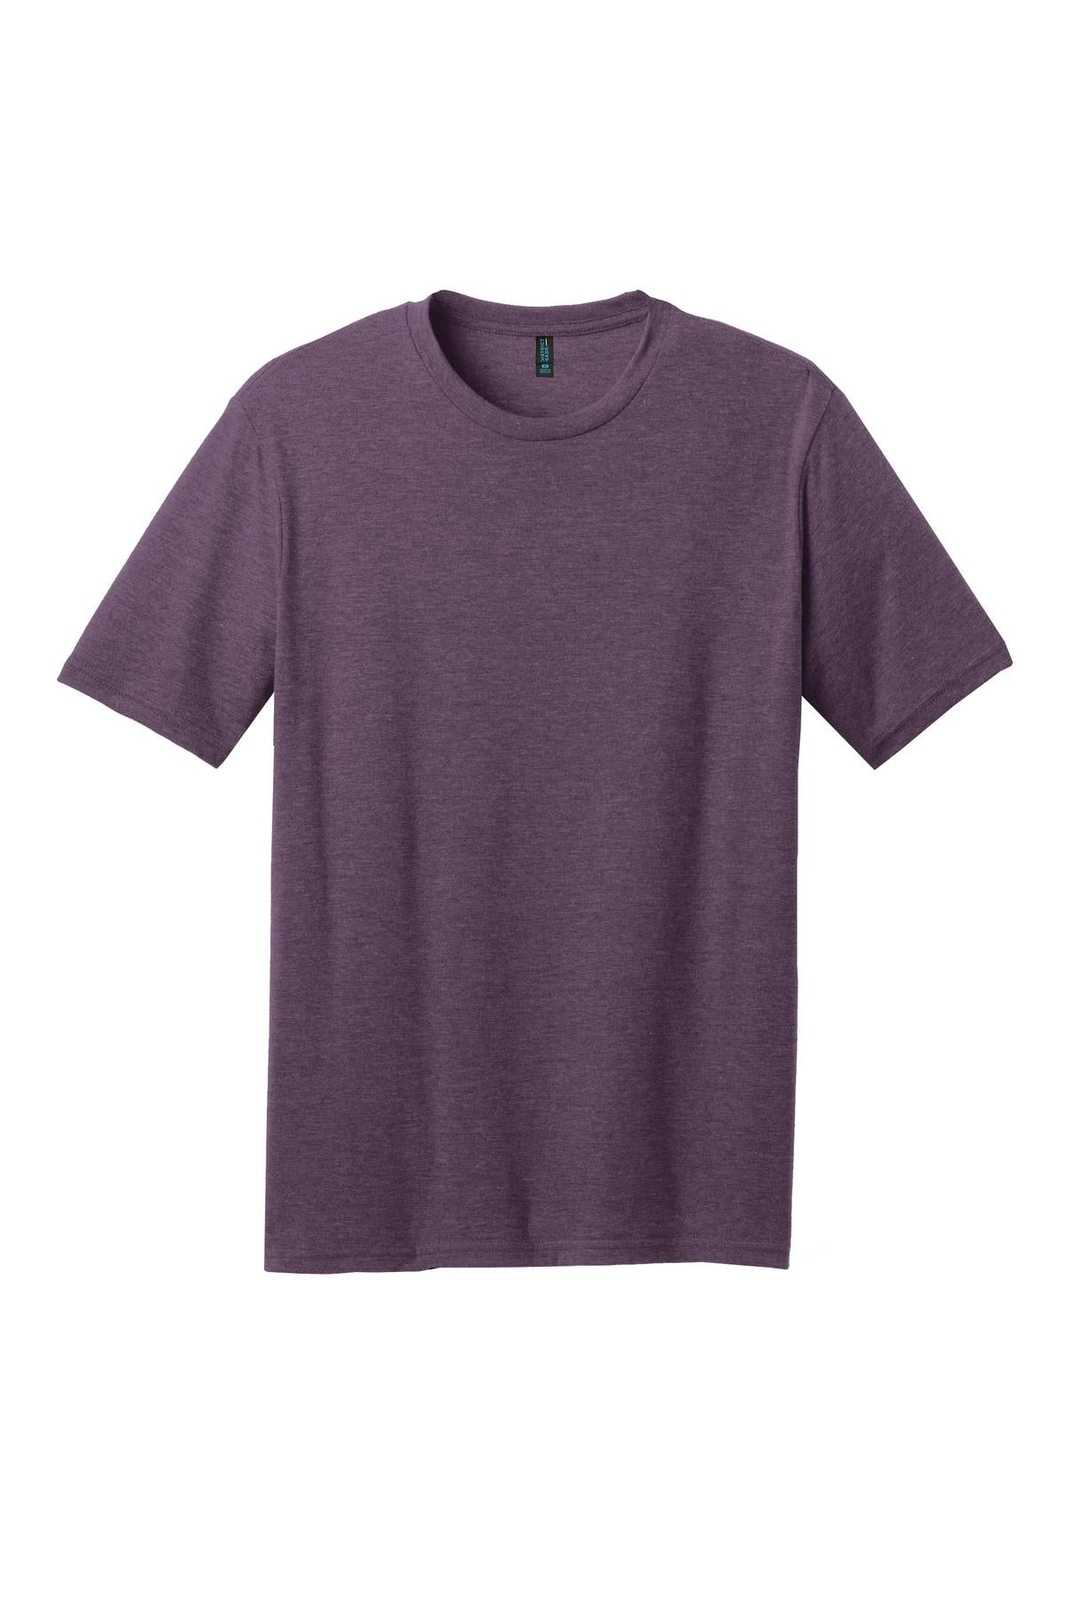 District DM108 Perfect Blend Tee - Heathered Eggplant - HIT a Double - 5